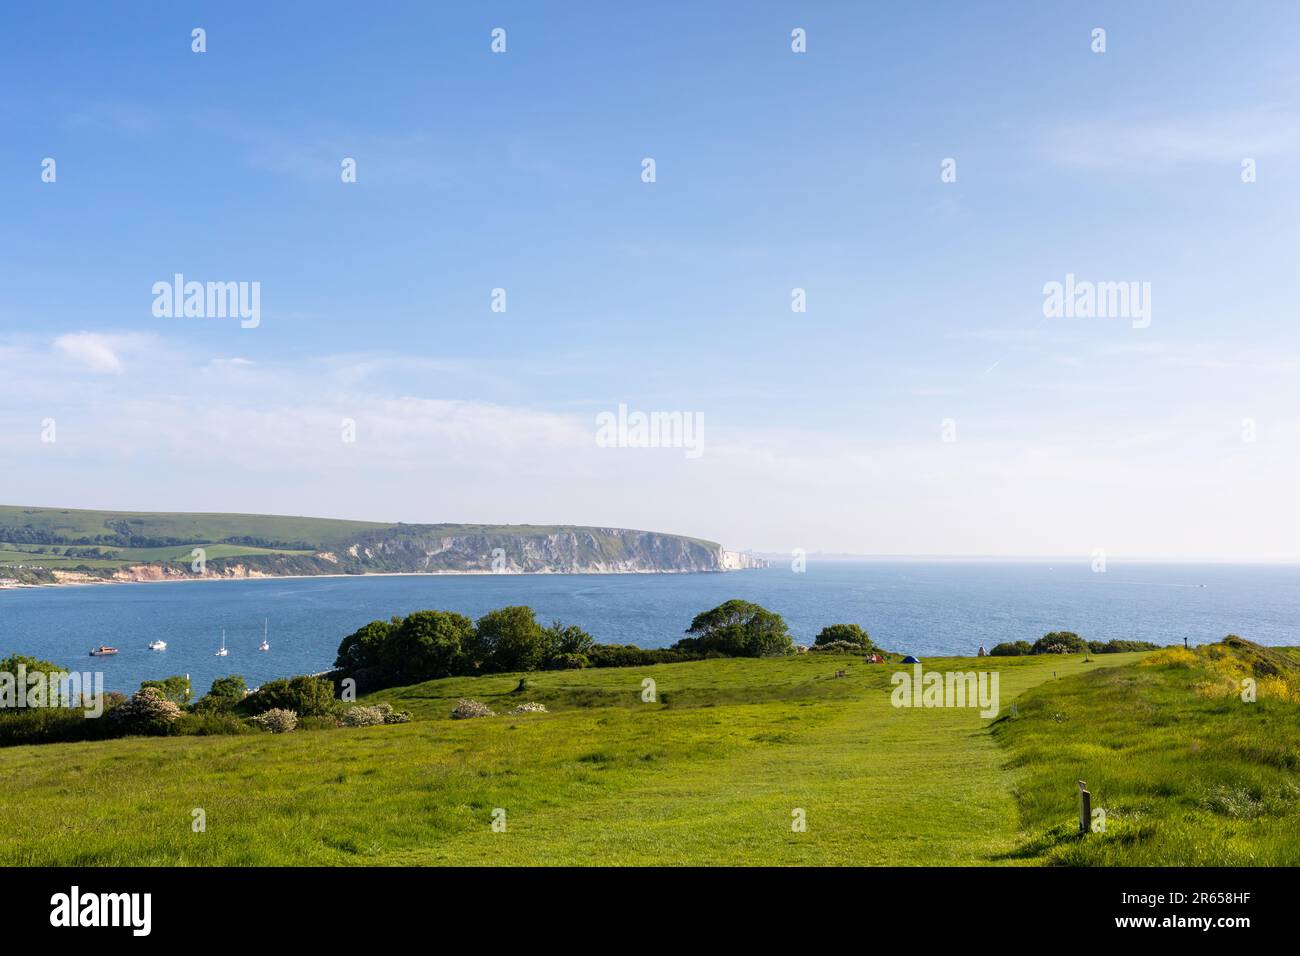 View of Swanage Bay in Dorset, England Stock Photo